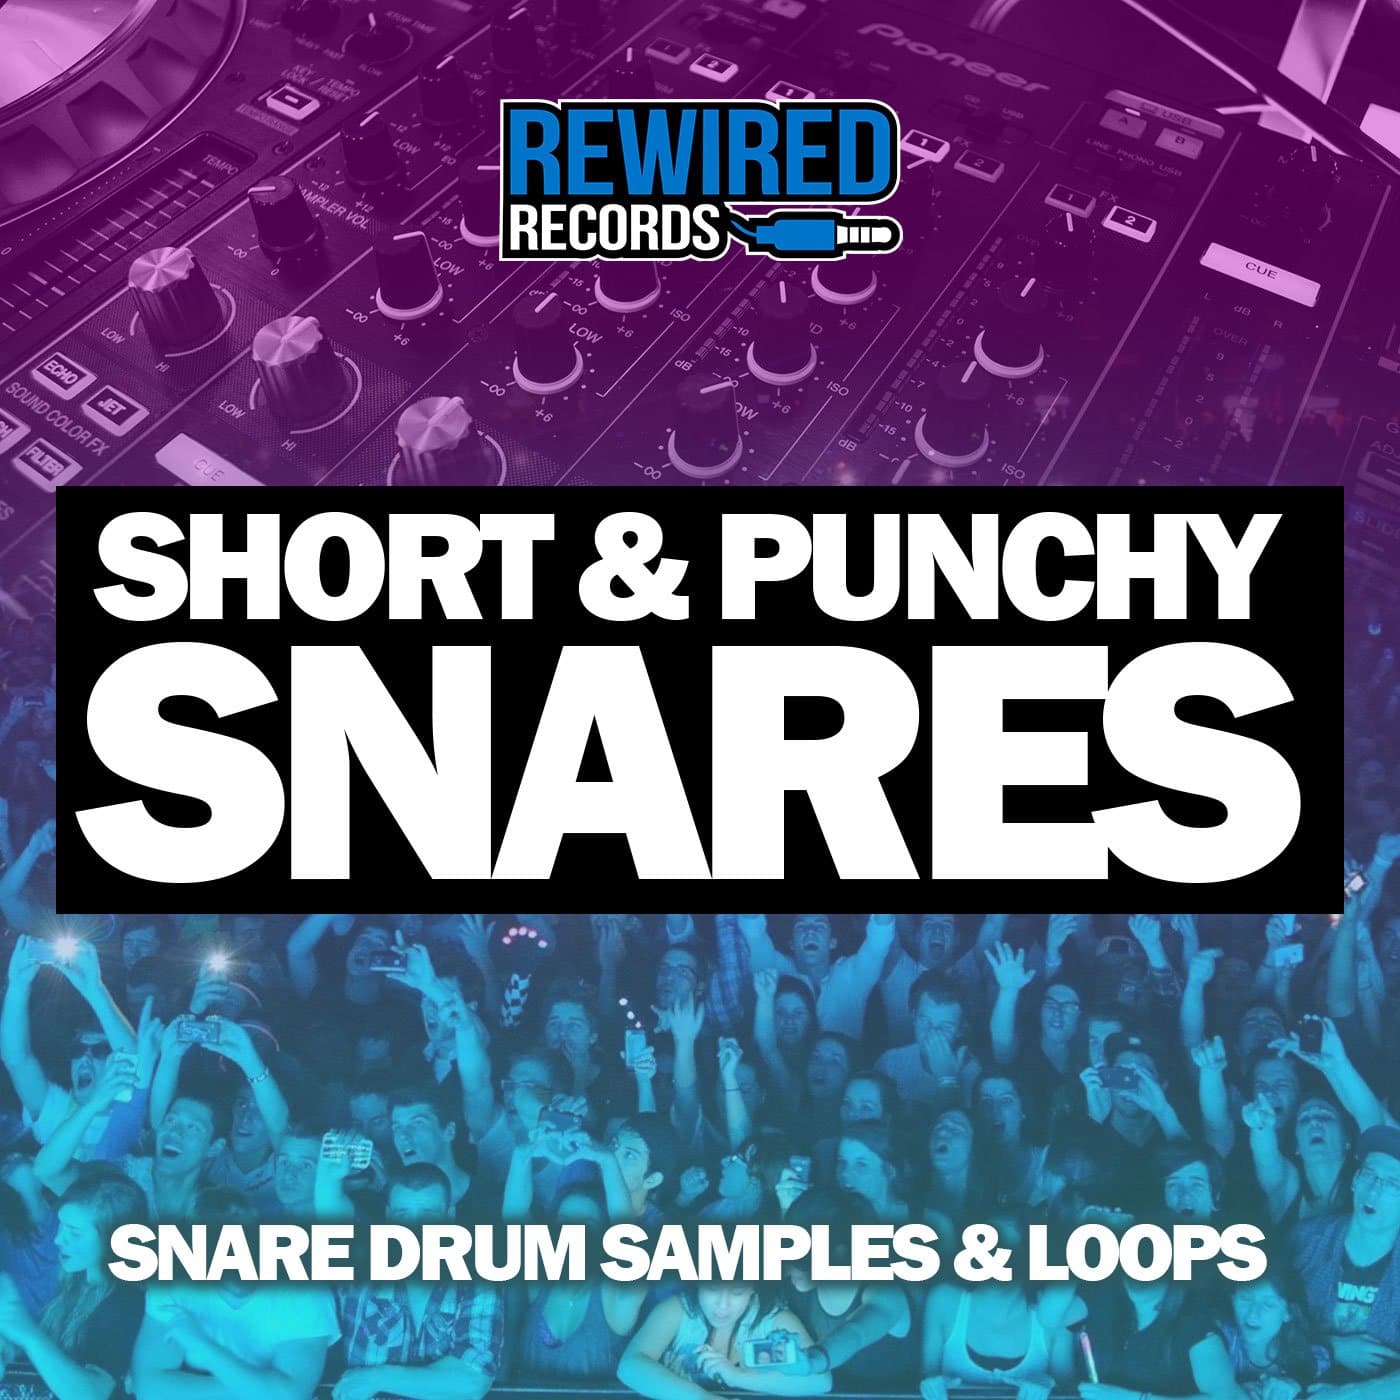 Short & Punchy Snares - Rewired Records